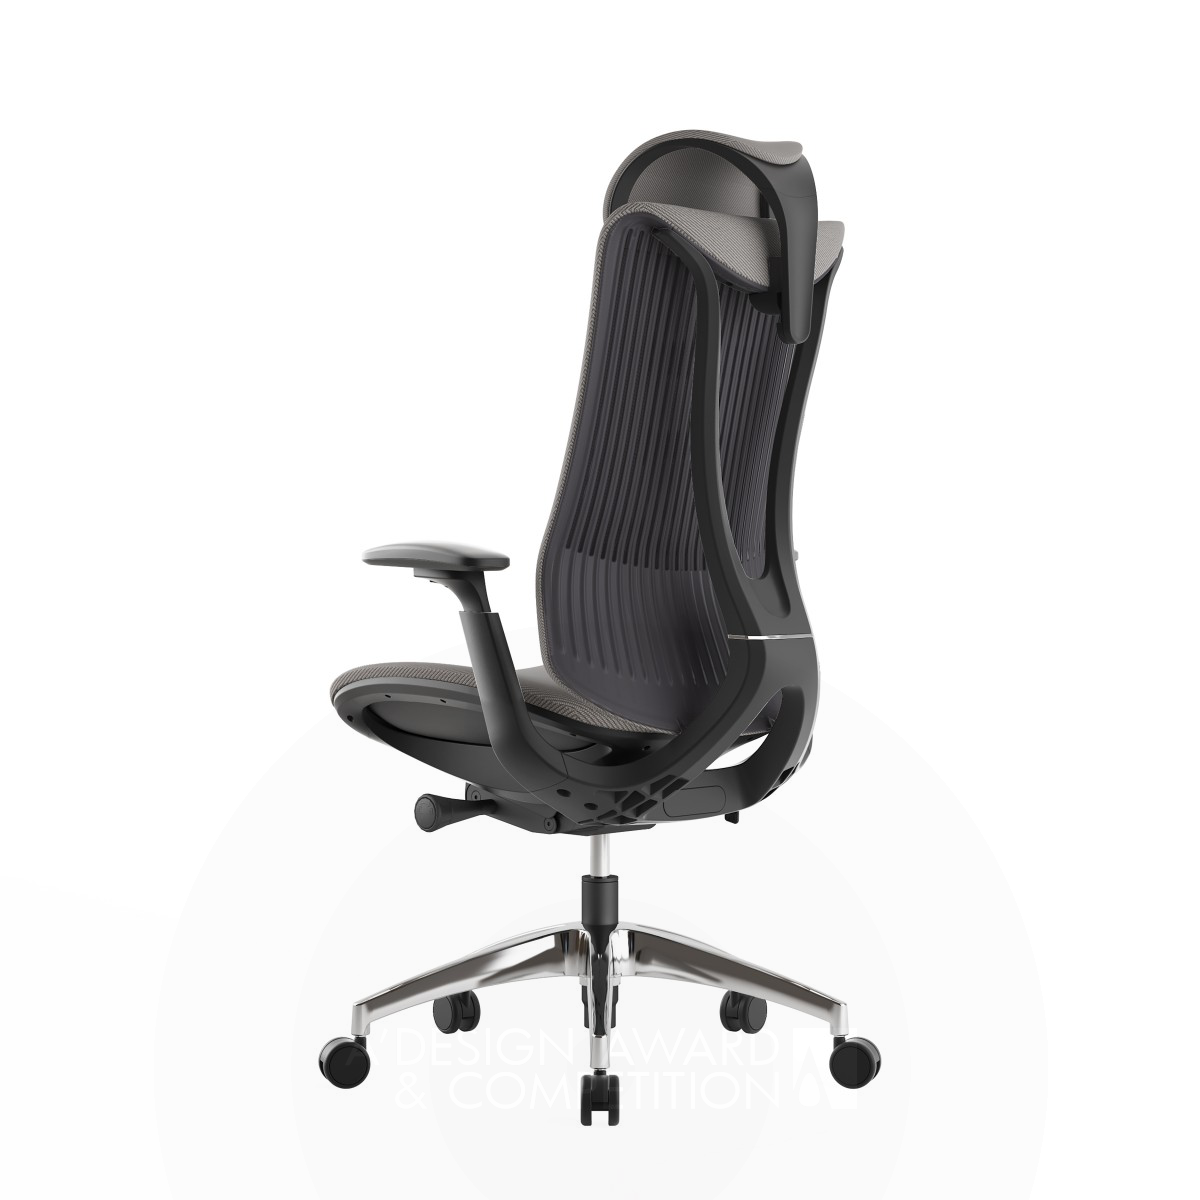 KOHO R&amp;D Team wins Silver at the prestigious A' Office Furniture Design Award with Icloud Office Chair.